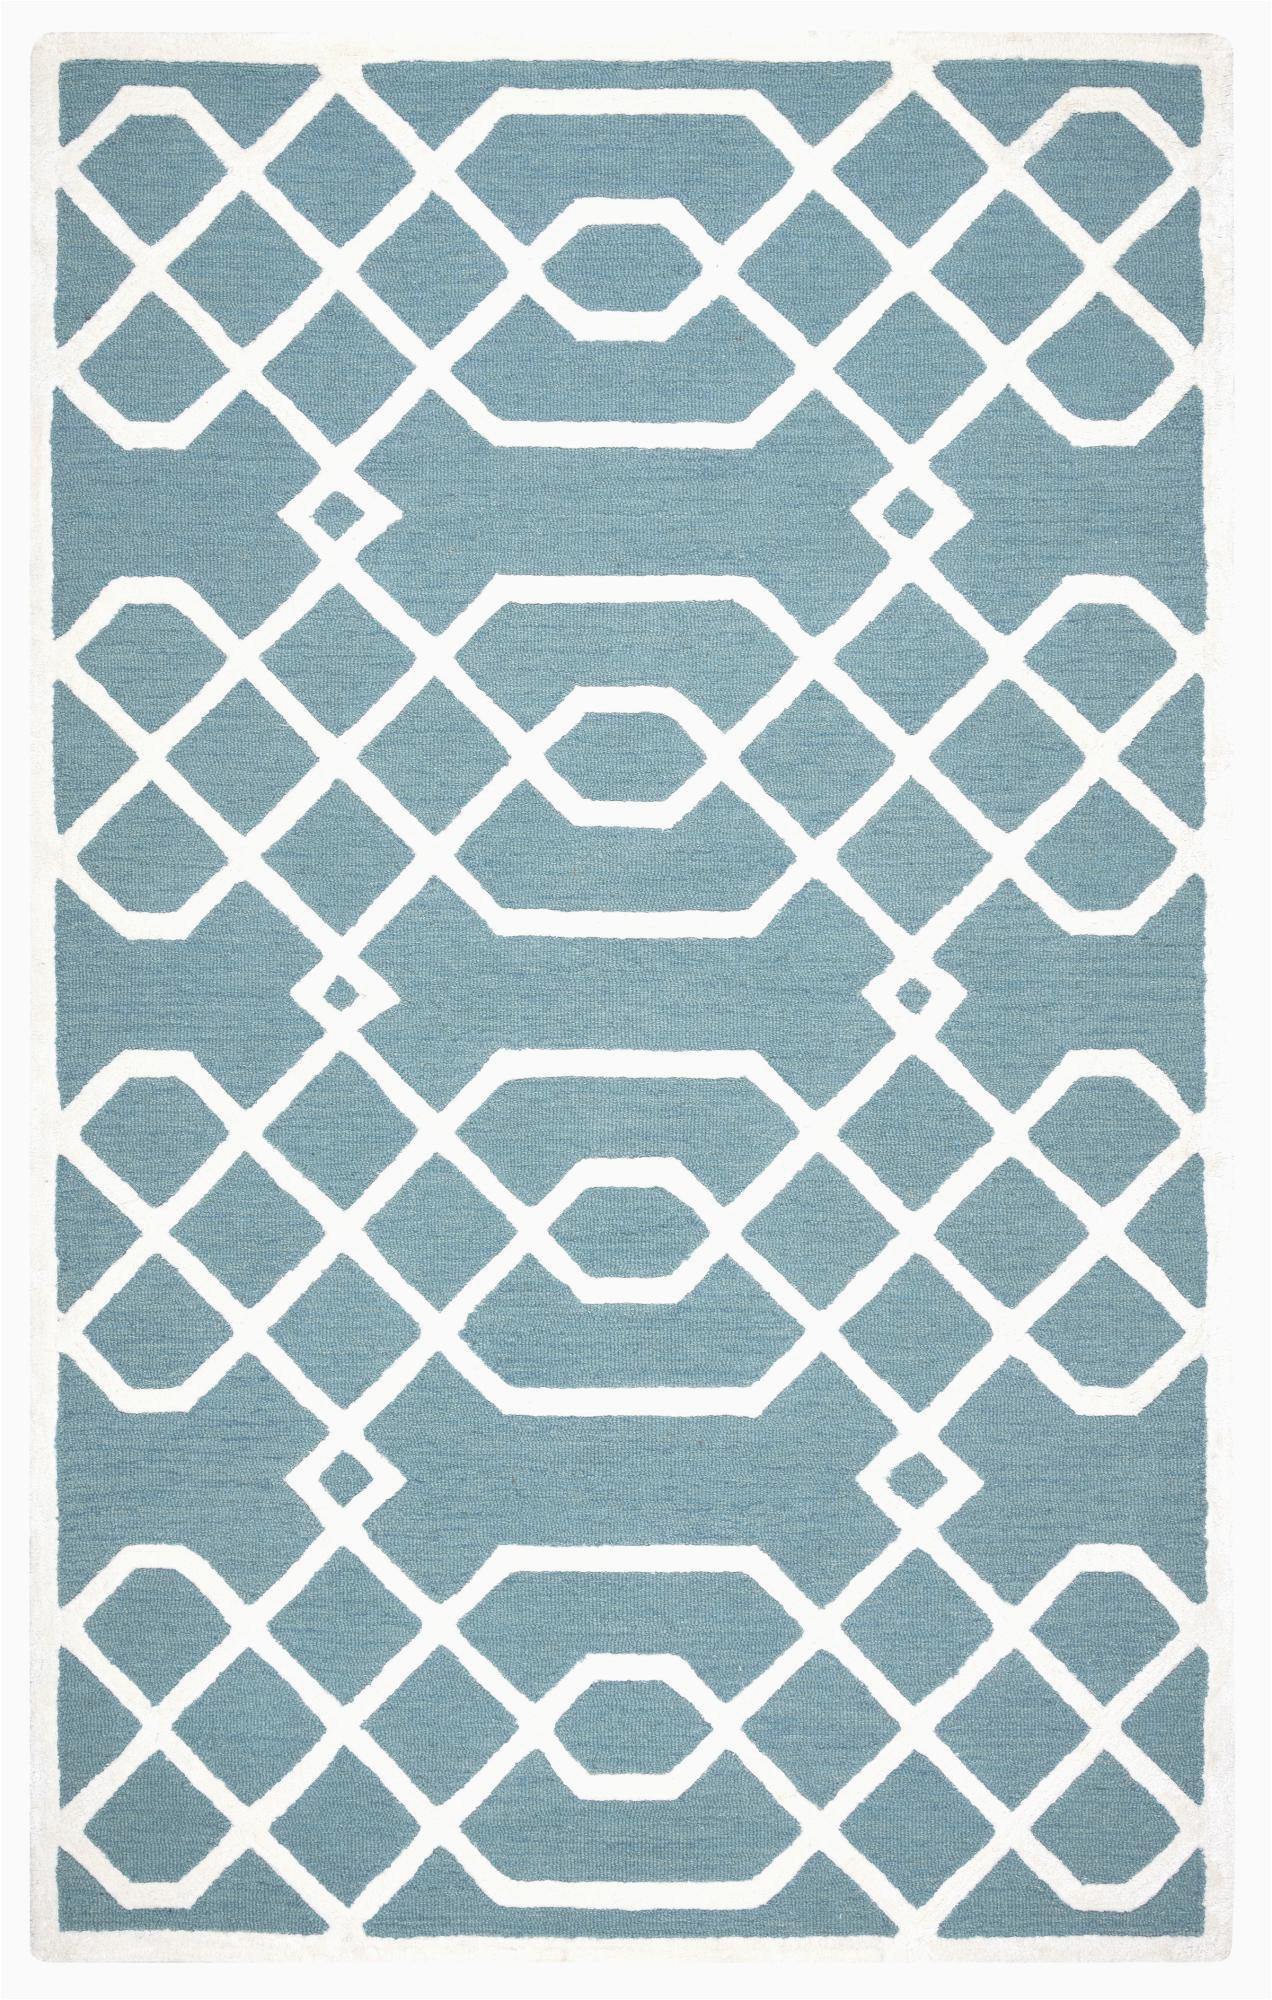 8 X 10 Teal area Rug Rizzy Home 8 X 10 Teal Geometric area Rugs Monme076a89ow0810